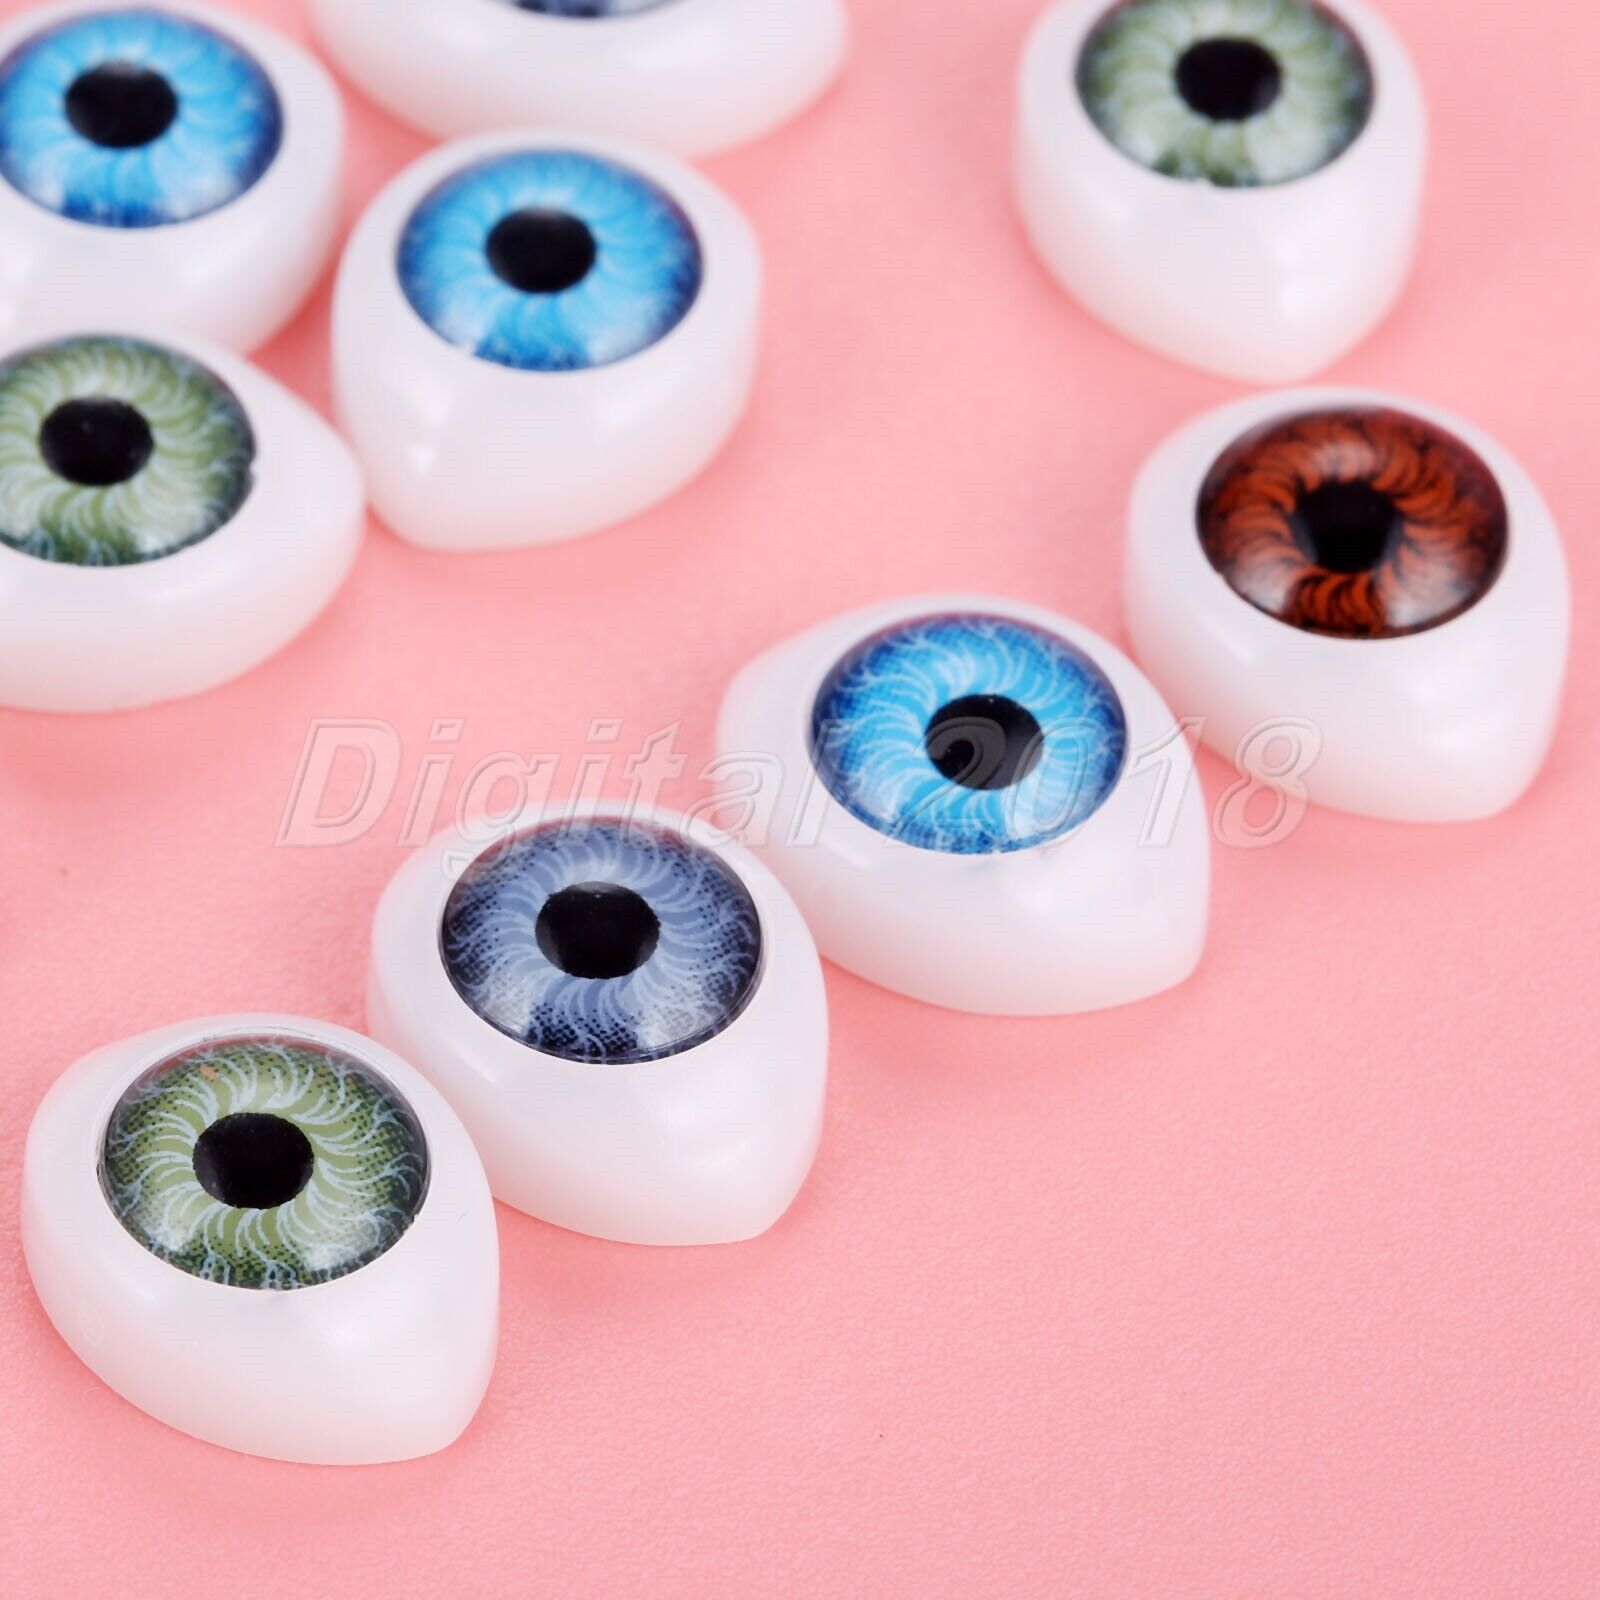 100Pcs 0.47"*0.63" Safety Doll Eyes Toys For Doll Making Eyes Doll Accessories Unbranded Does Not Apply - фотография #12